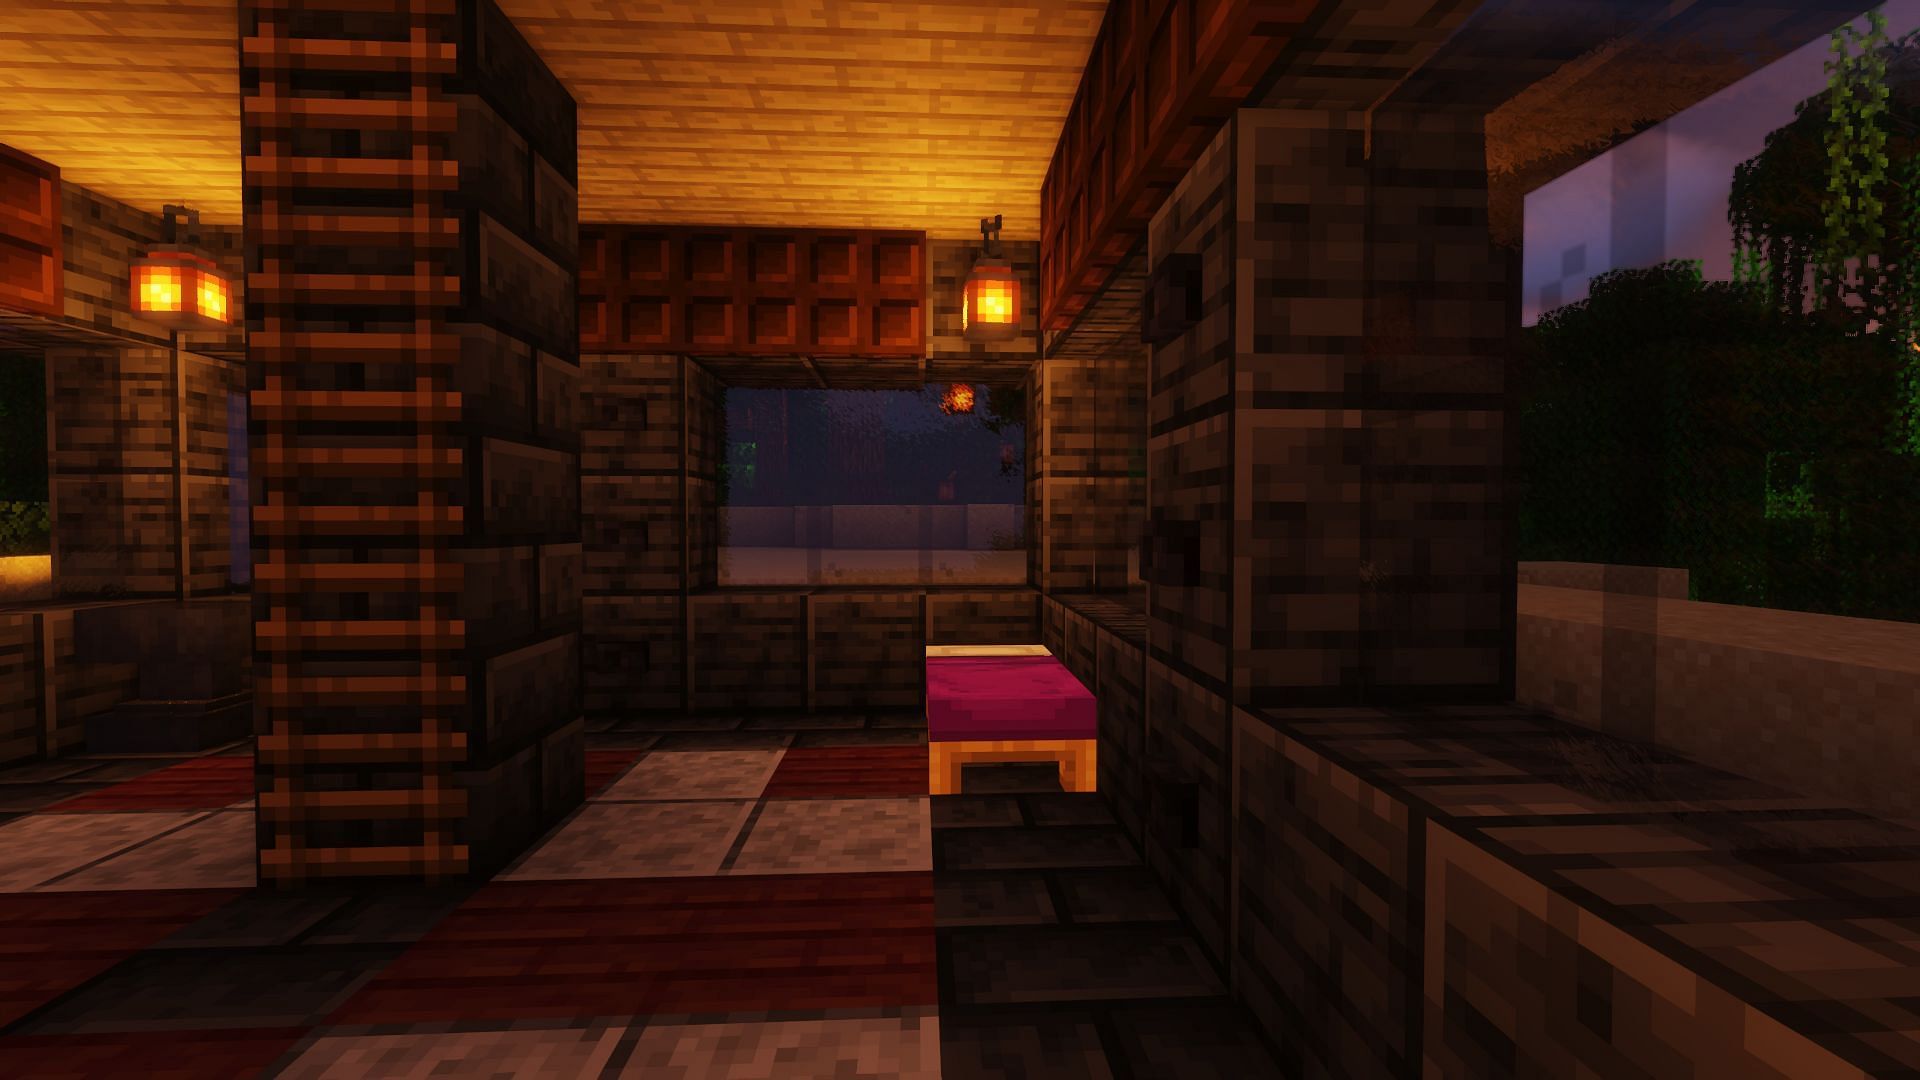 Buttons as wall decorations, adding detail and visual interest (Image via Minecraft)